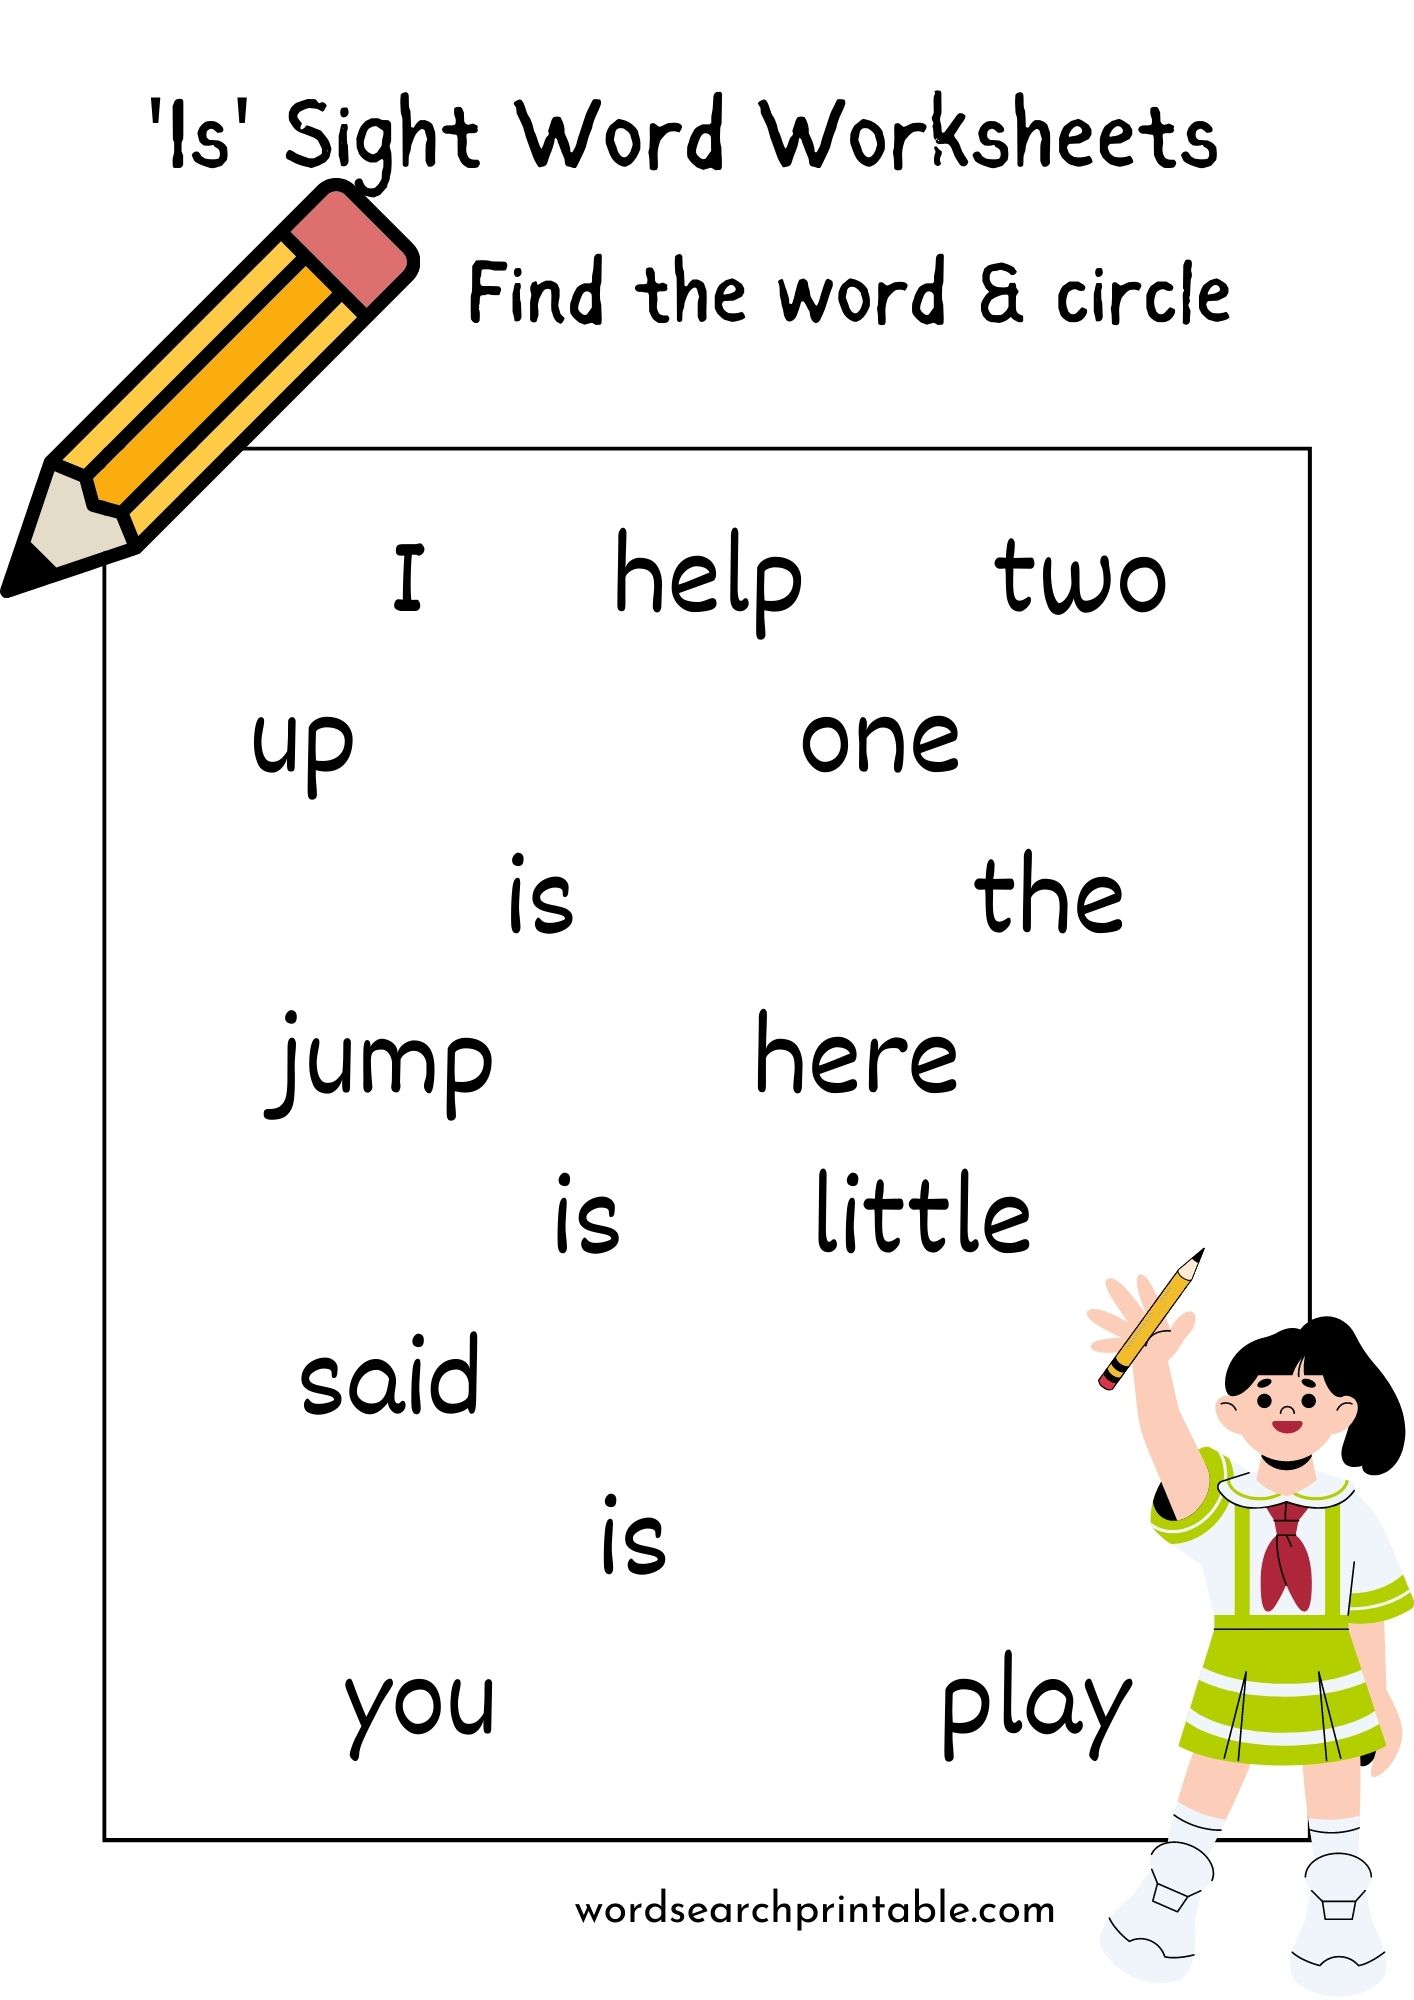 Find the sight word Is and circle it